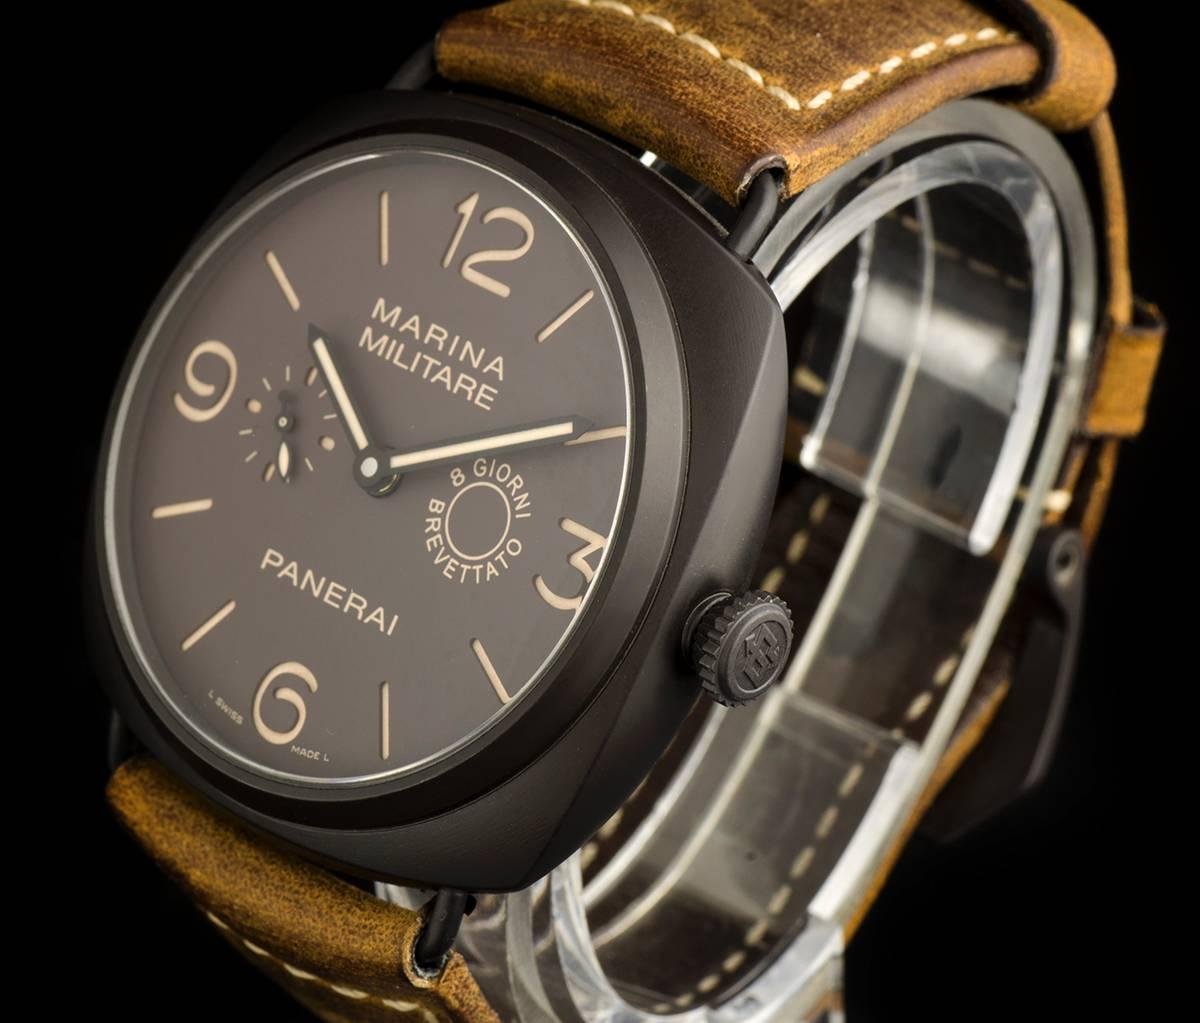 A Composite Radiomir Marina Militare 8 Giorni Gents Wristwatch PAM00339, brown dial with arabic numbers and index batons, small seconds at 9 0'clock, brown leather strap with a composite pin buckle, sapphire glass, manual wind movement, 8 days power